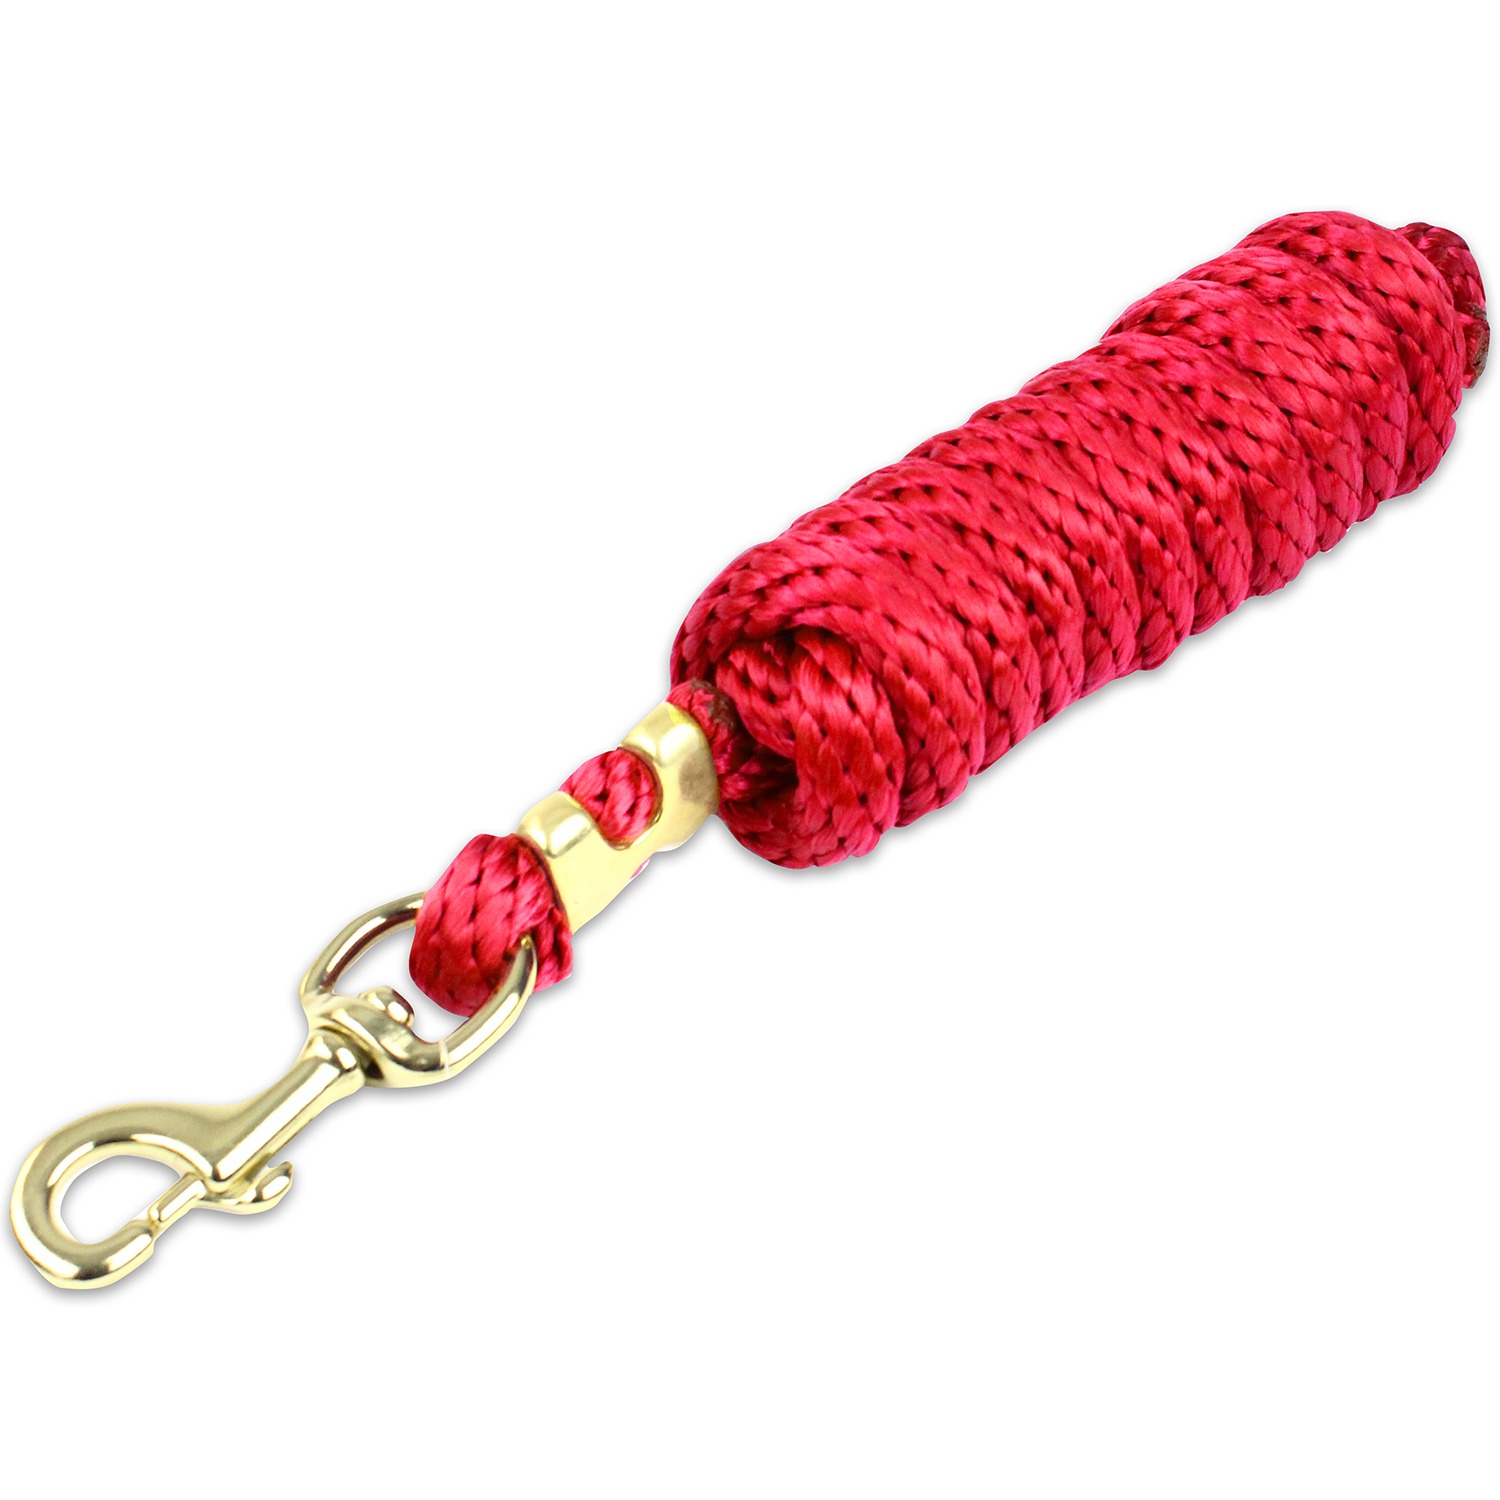 - ASSORTED COLORS SALE! 6 ft KM ELITE POLY LEAD ROPE 